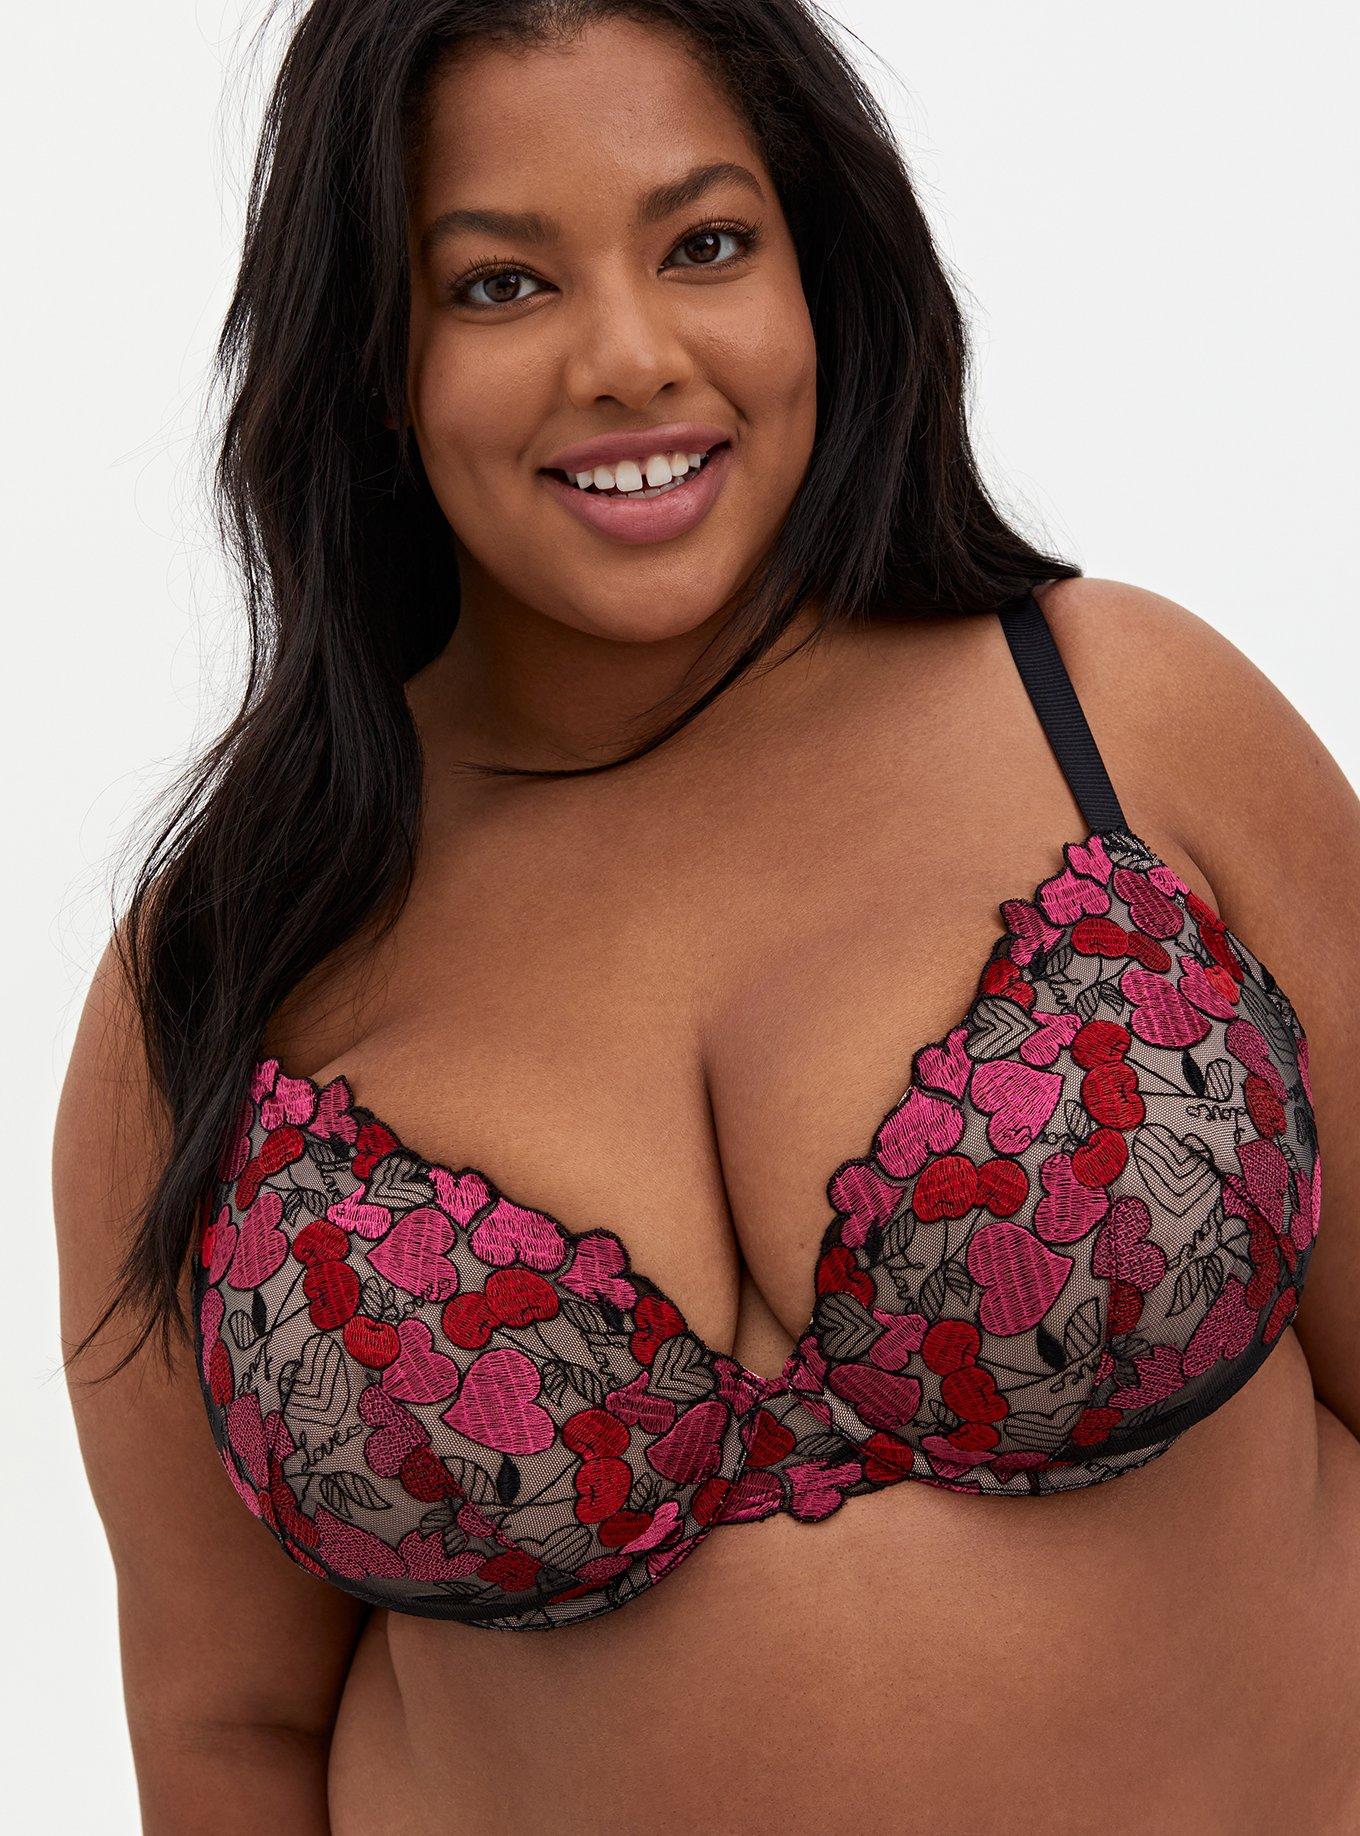 Plus Size - Black Mesh & Red Cherry Heart Embroidered Push-Up